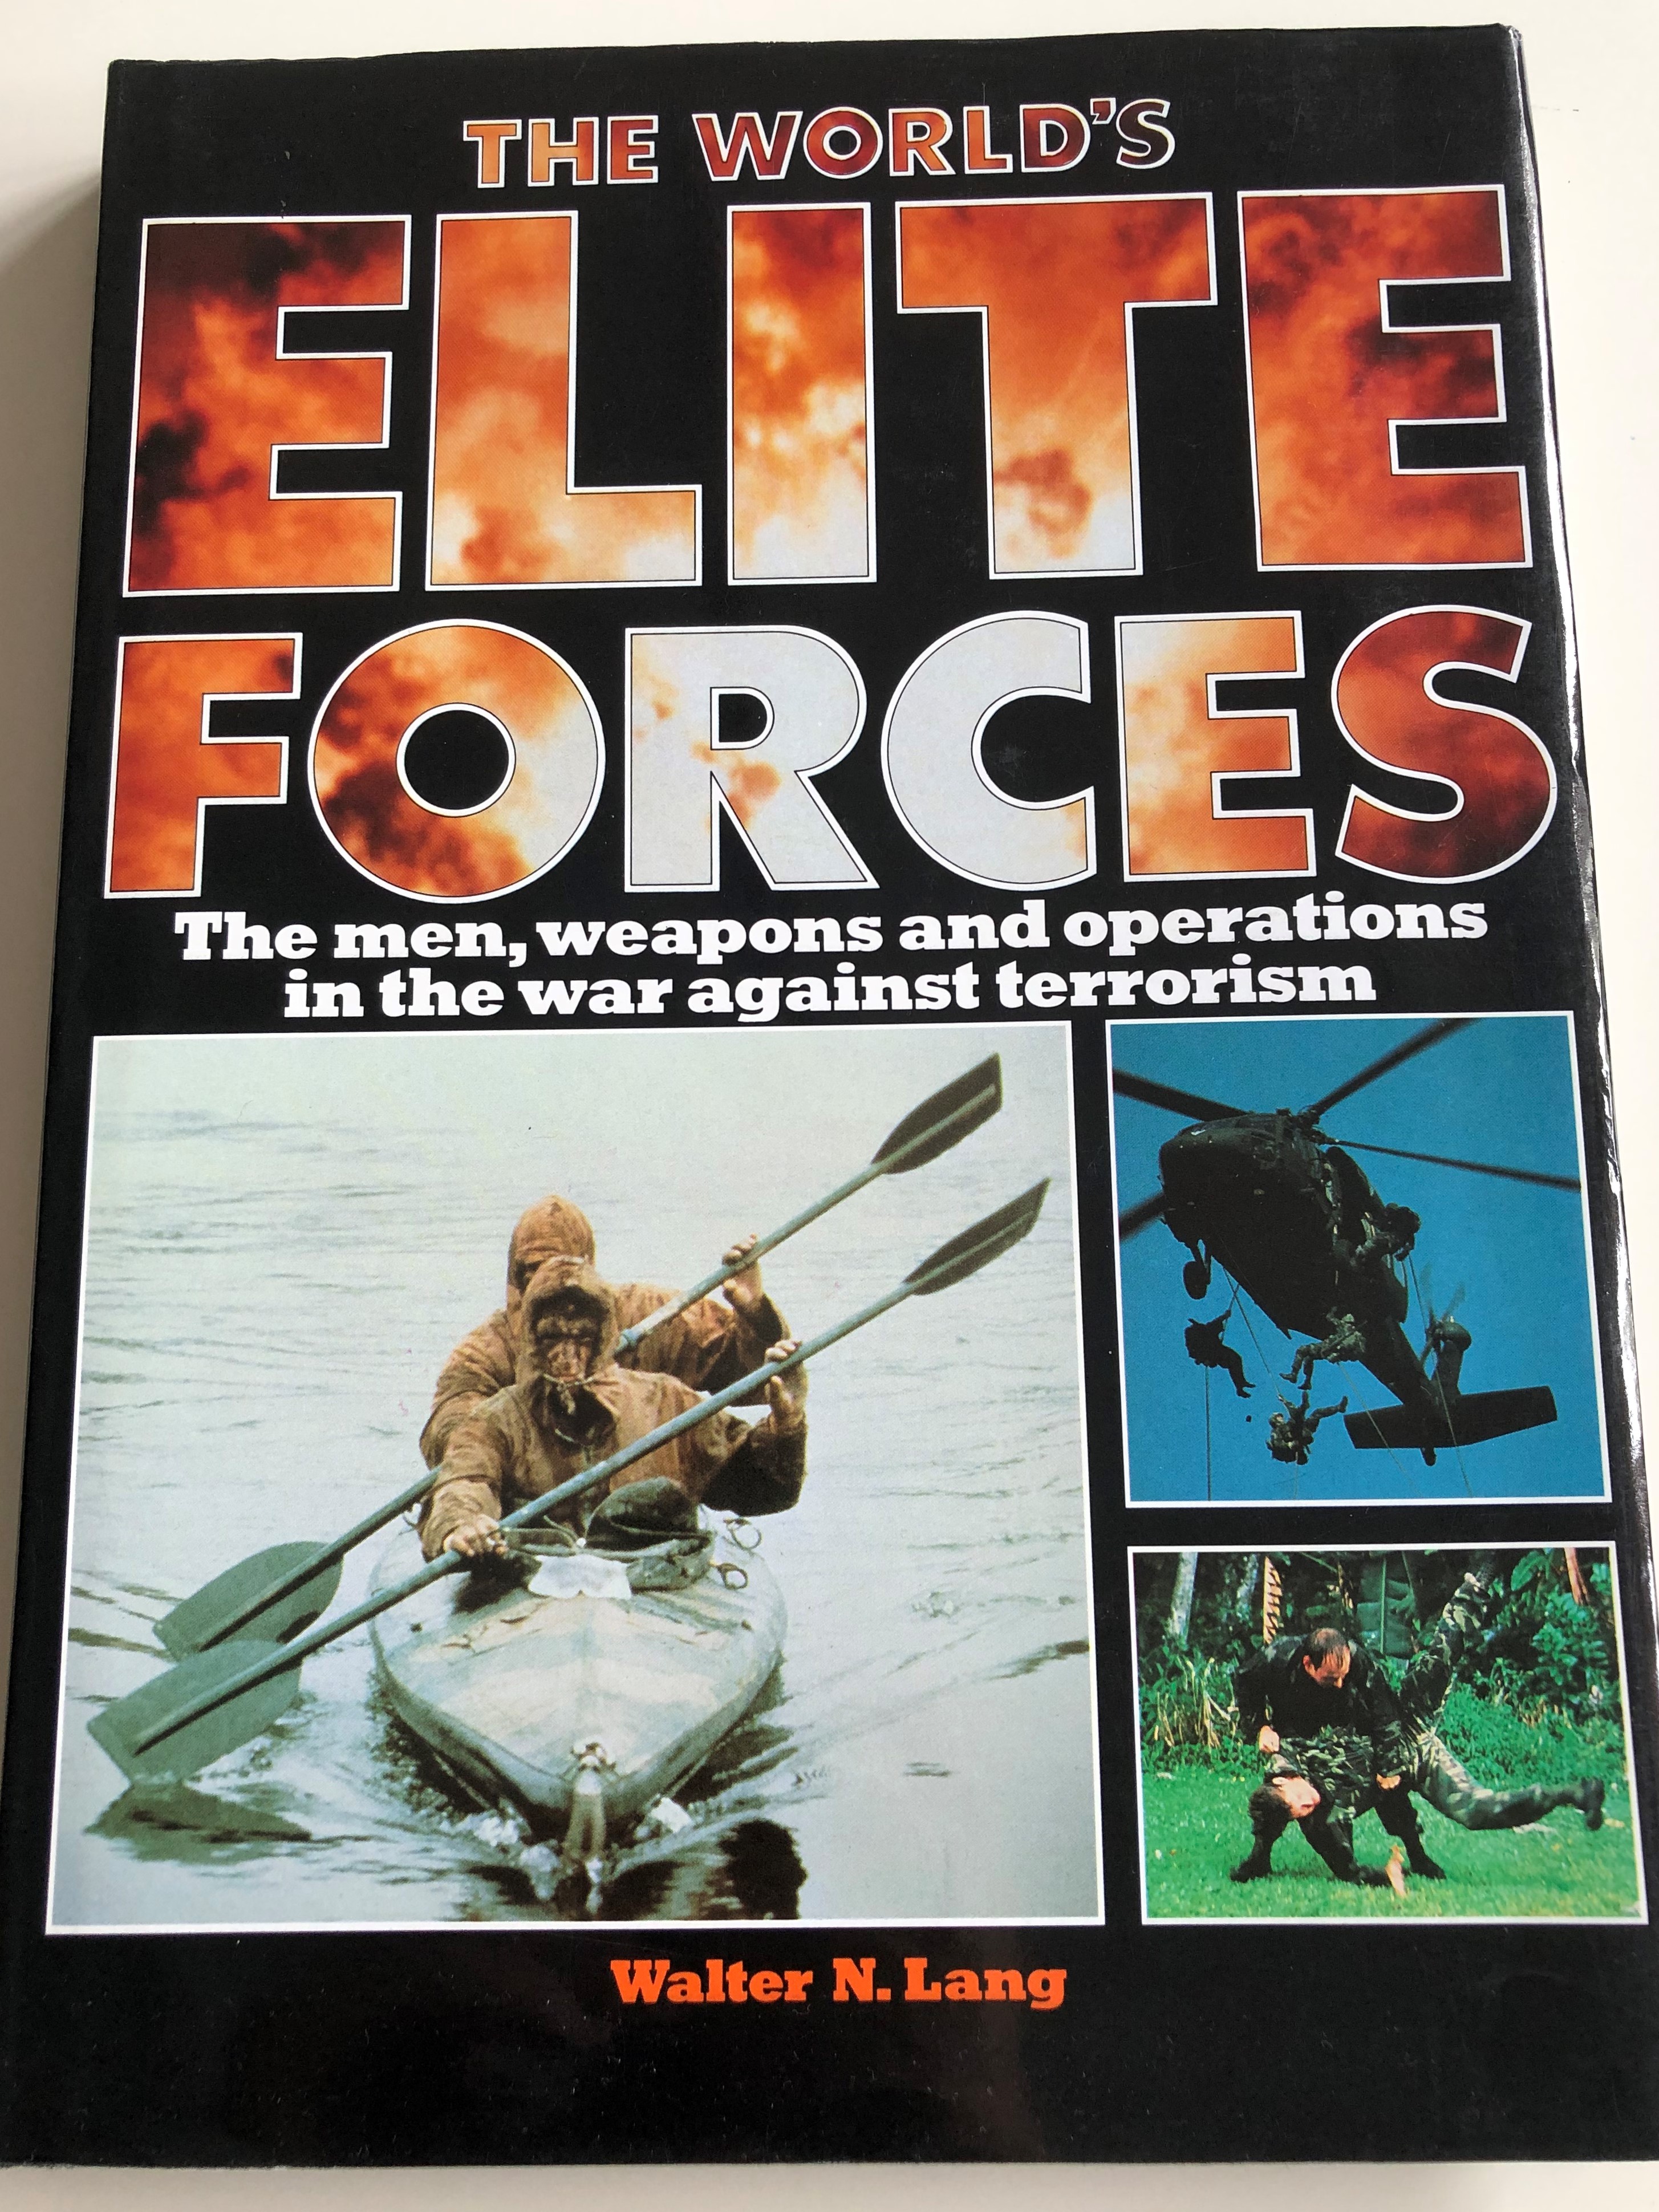 the-world-s-elite-forces-by-walter-n.-lang-the-men-weapons-and-operations-in-the-war-against-terrorism-sas-sbs-seals-gsg-9-french-foreign-legin-spetsnaz-elite-forces-of-the-world-hardcover-1989-salamander-books-1-.jpg